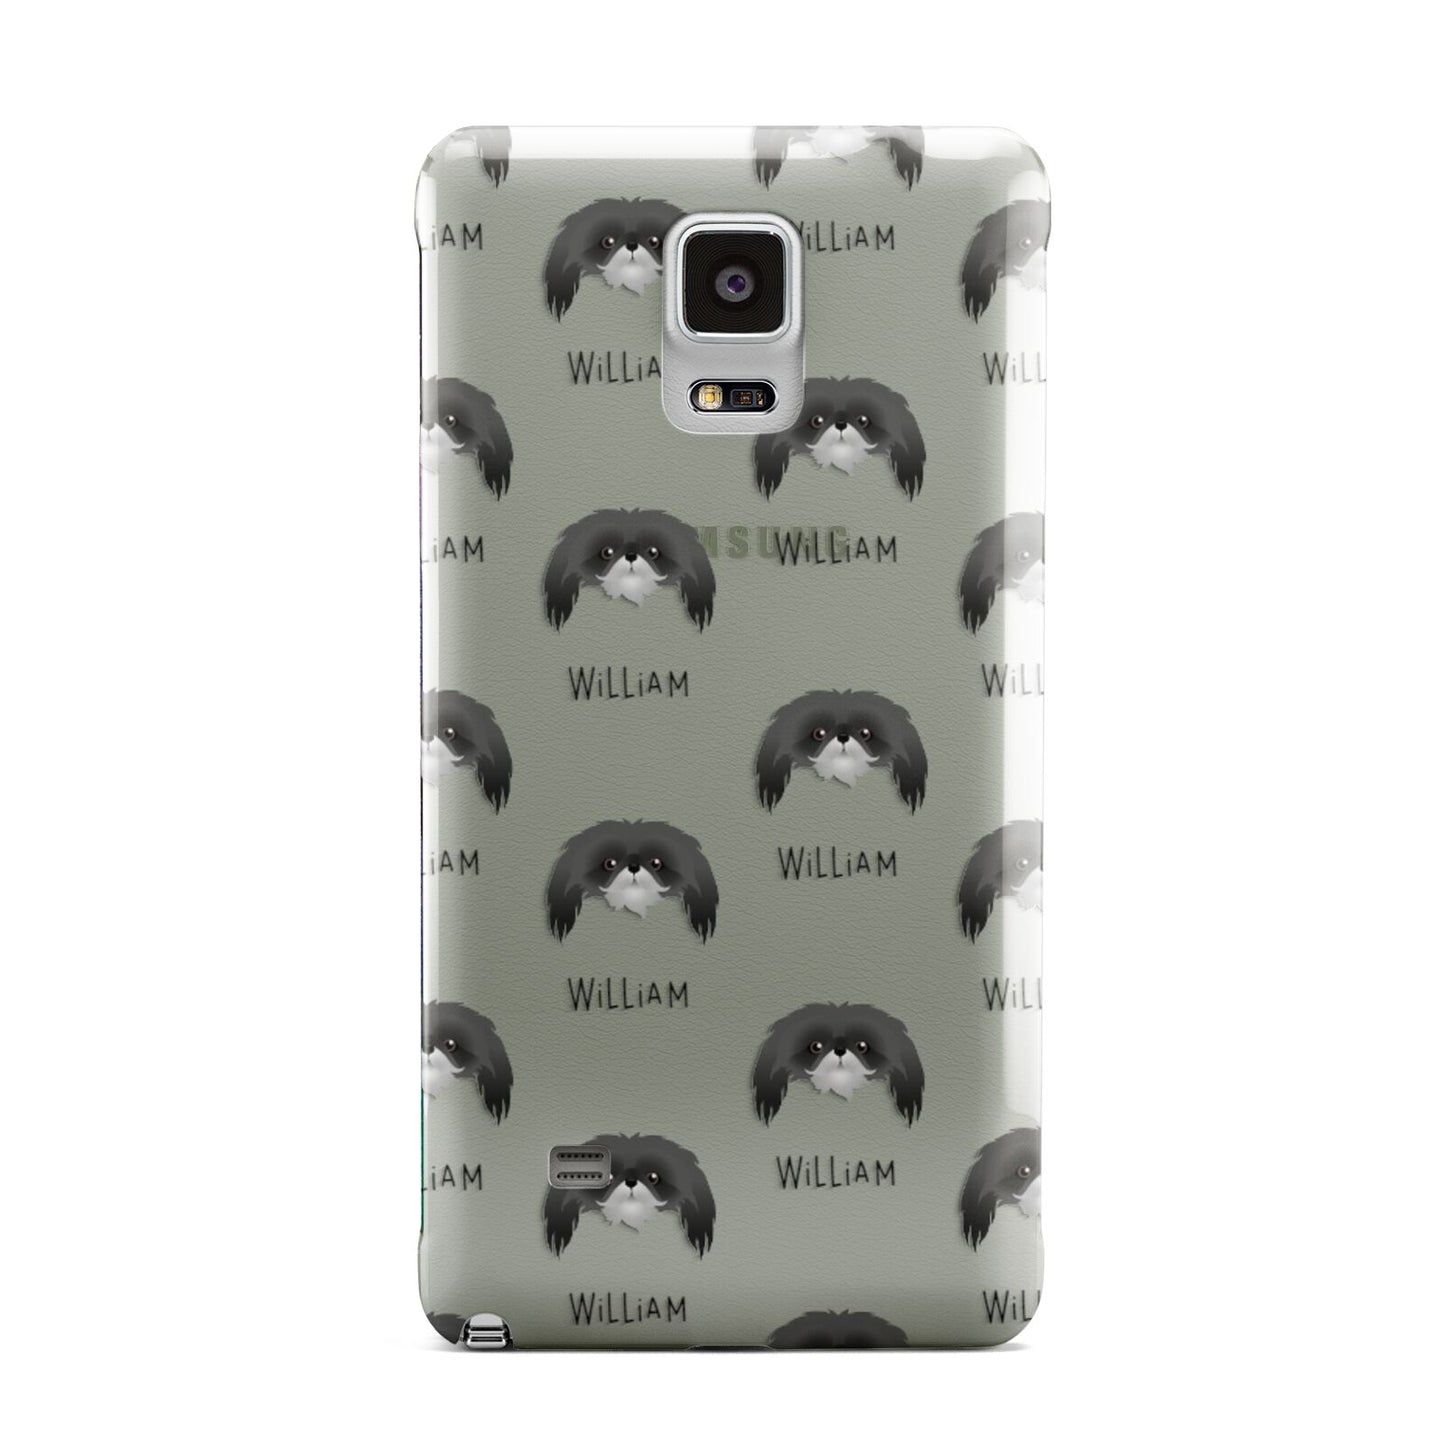 Pekingese Icon with Name Samsung Galaxy Note 4 Case